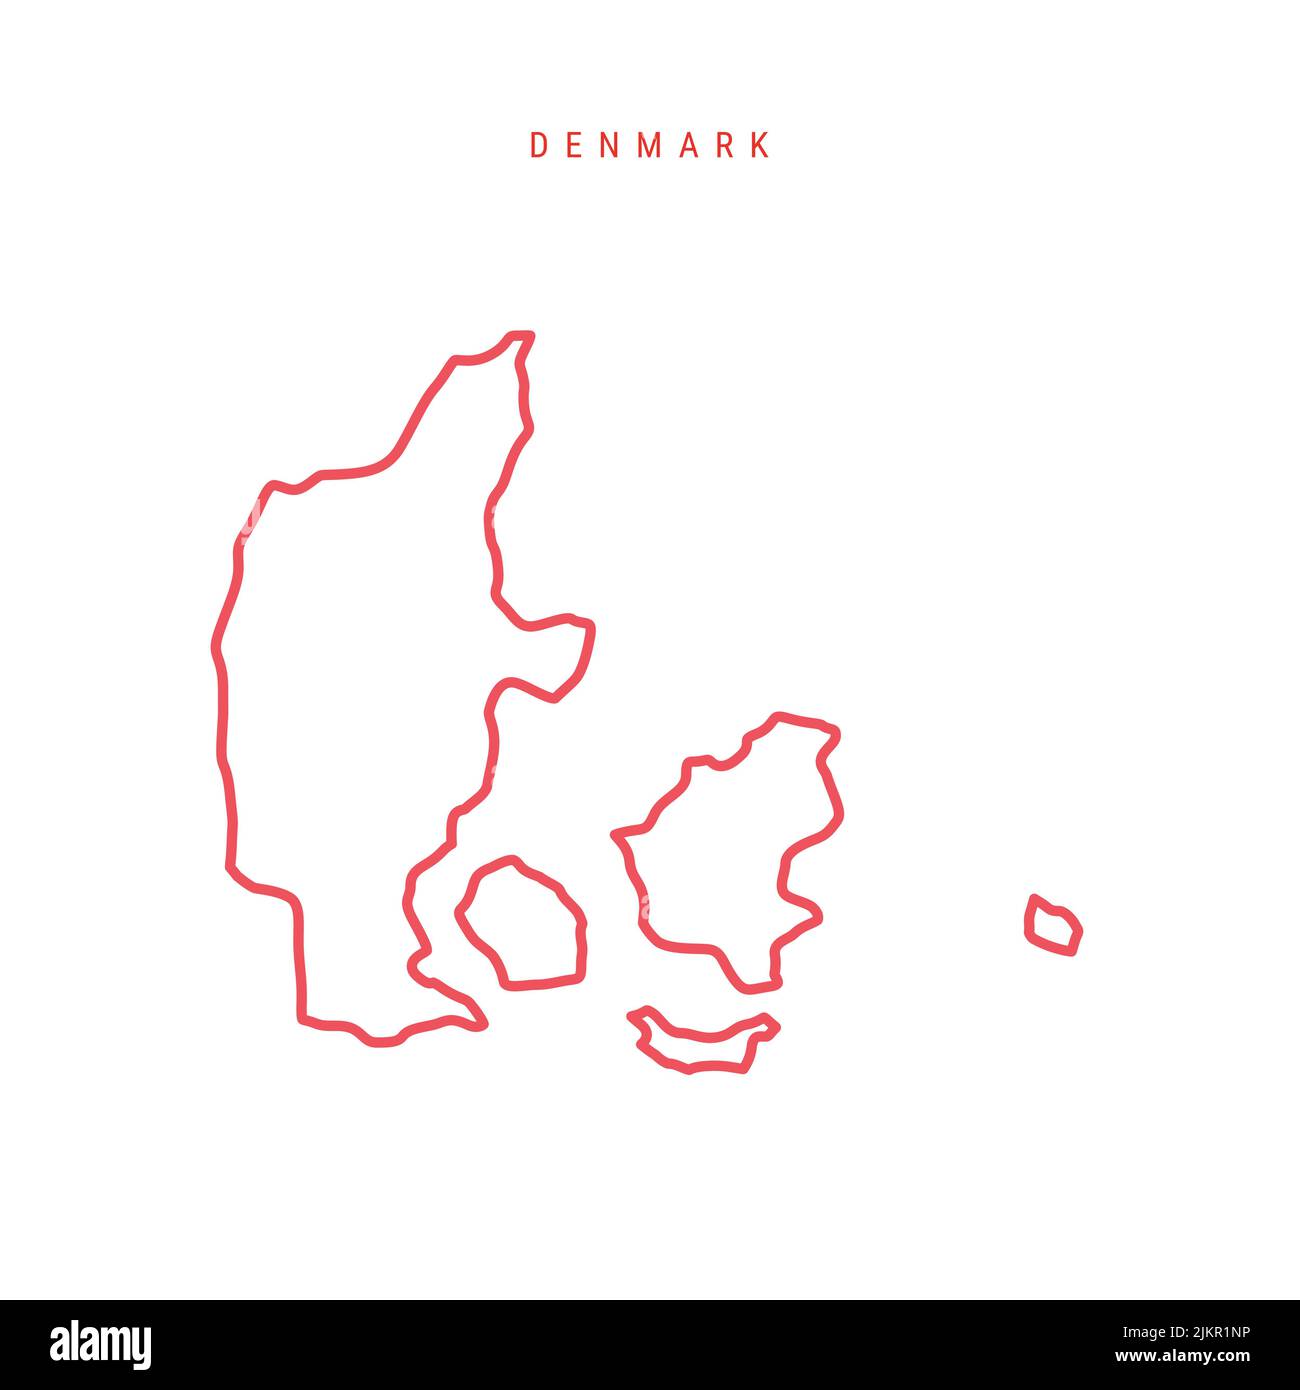 Denmark editable outline map. Danish red border. Country name. Adjust line weight. Change to any color. Vector illustration. Stock Vector